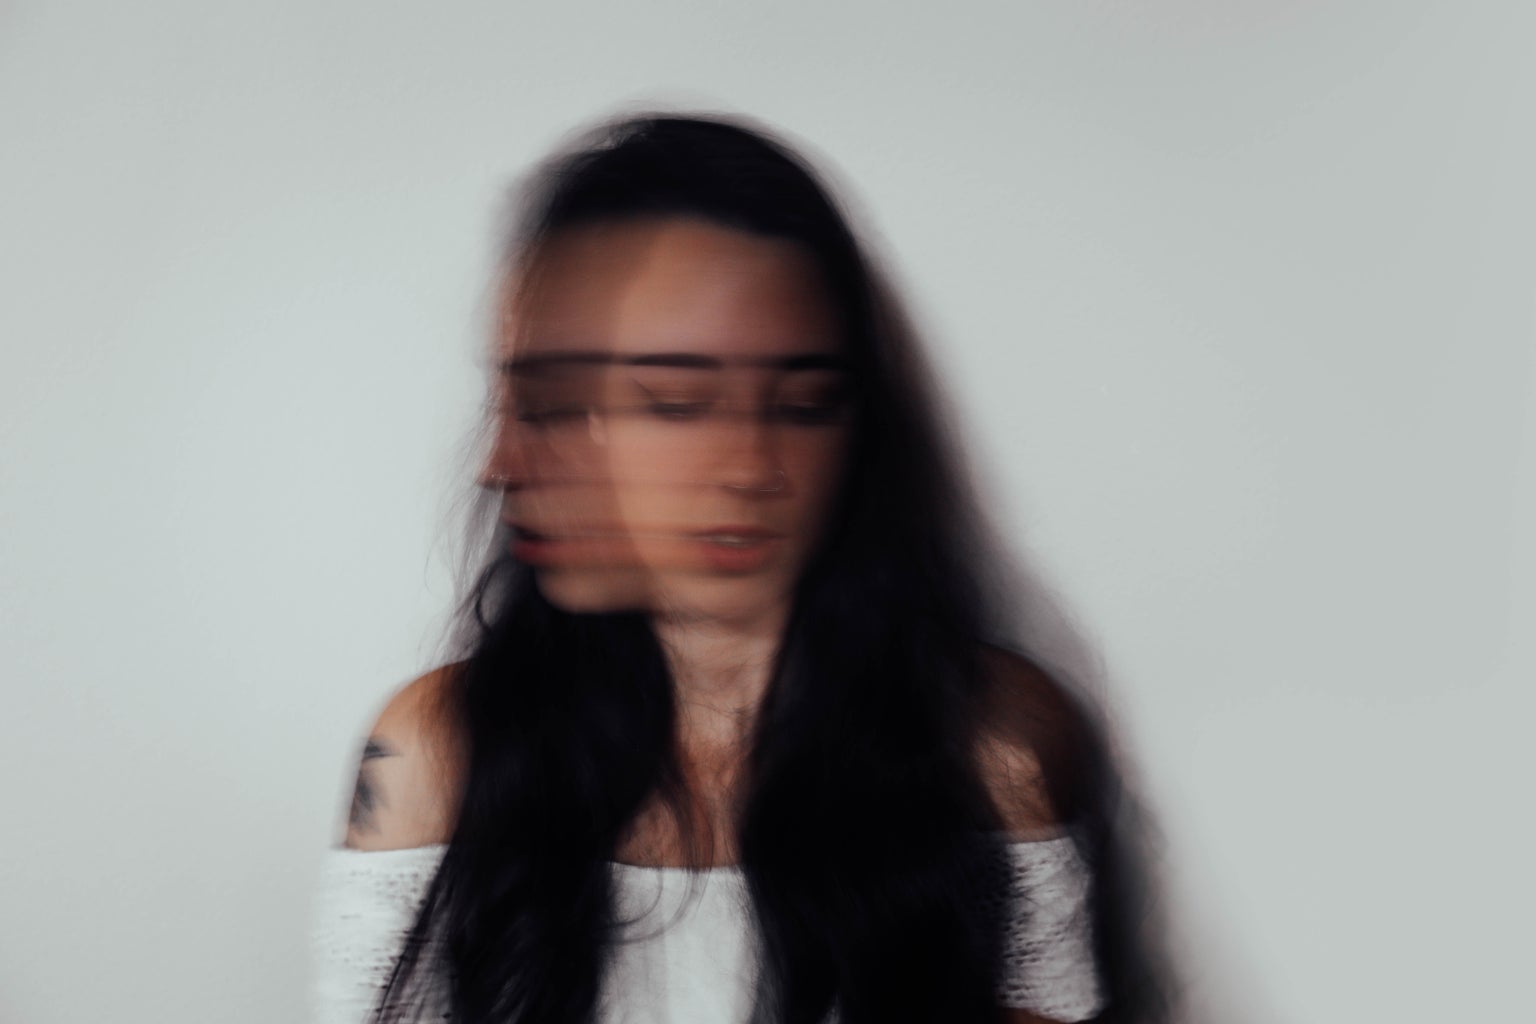 Blurry photo of a woman with dark hair in a white top shaking her head against a grey background.